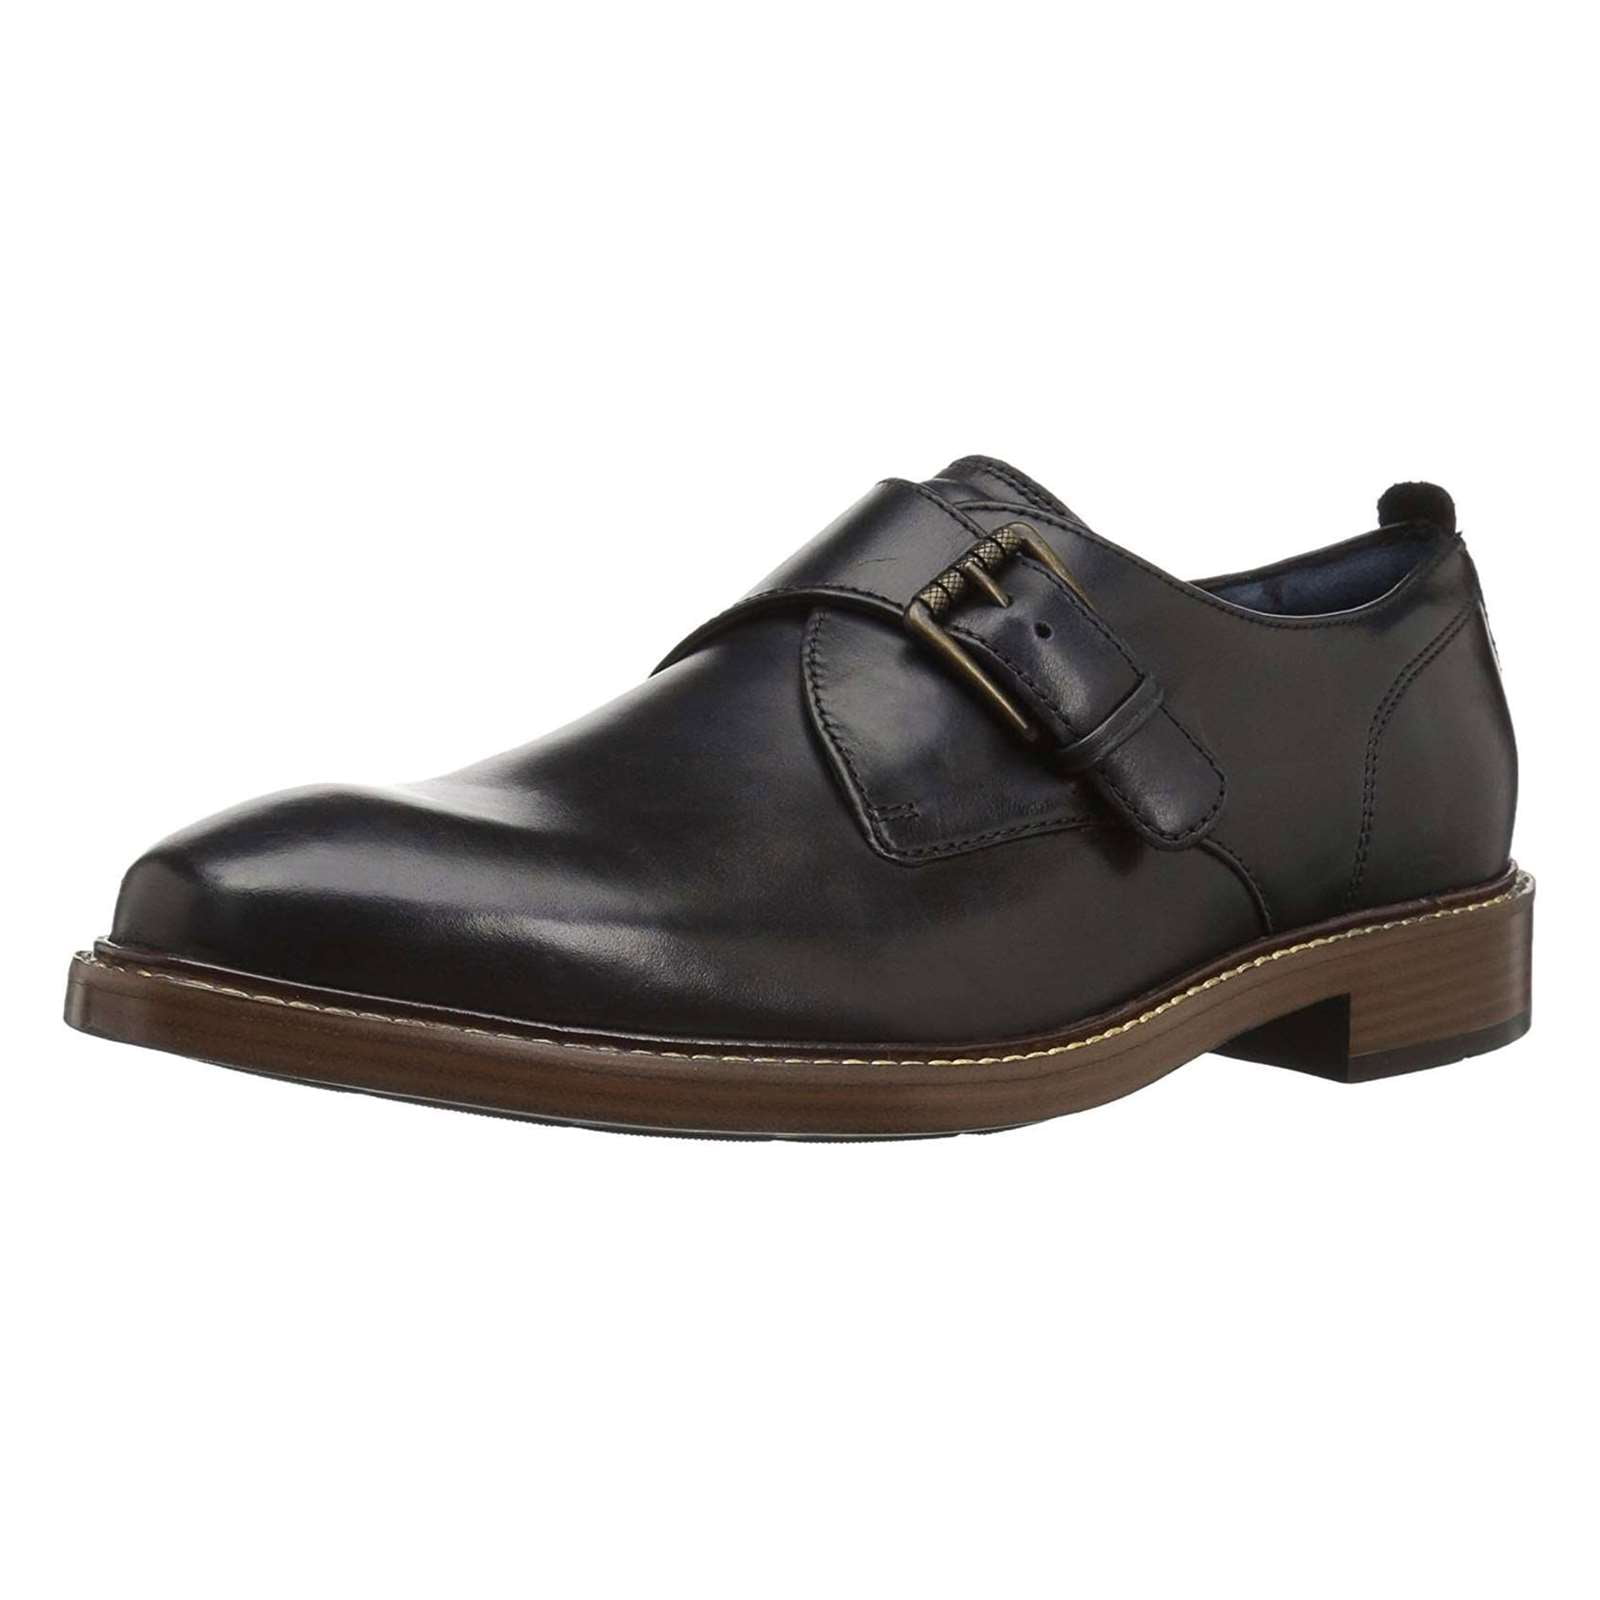 Cole Haan Men Casual Shoes Kennedy Single Monk Strap Oxford Shoes Black 